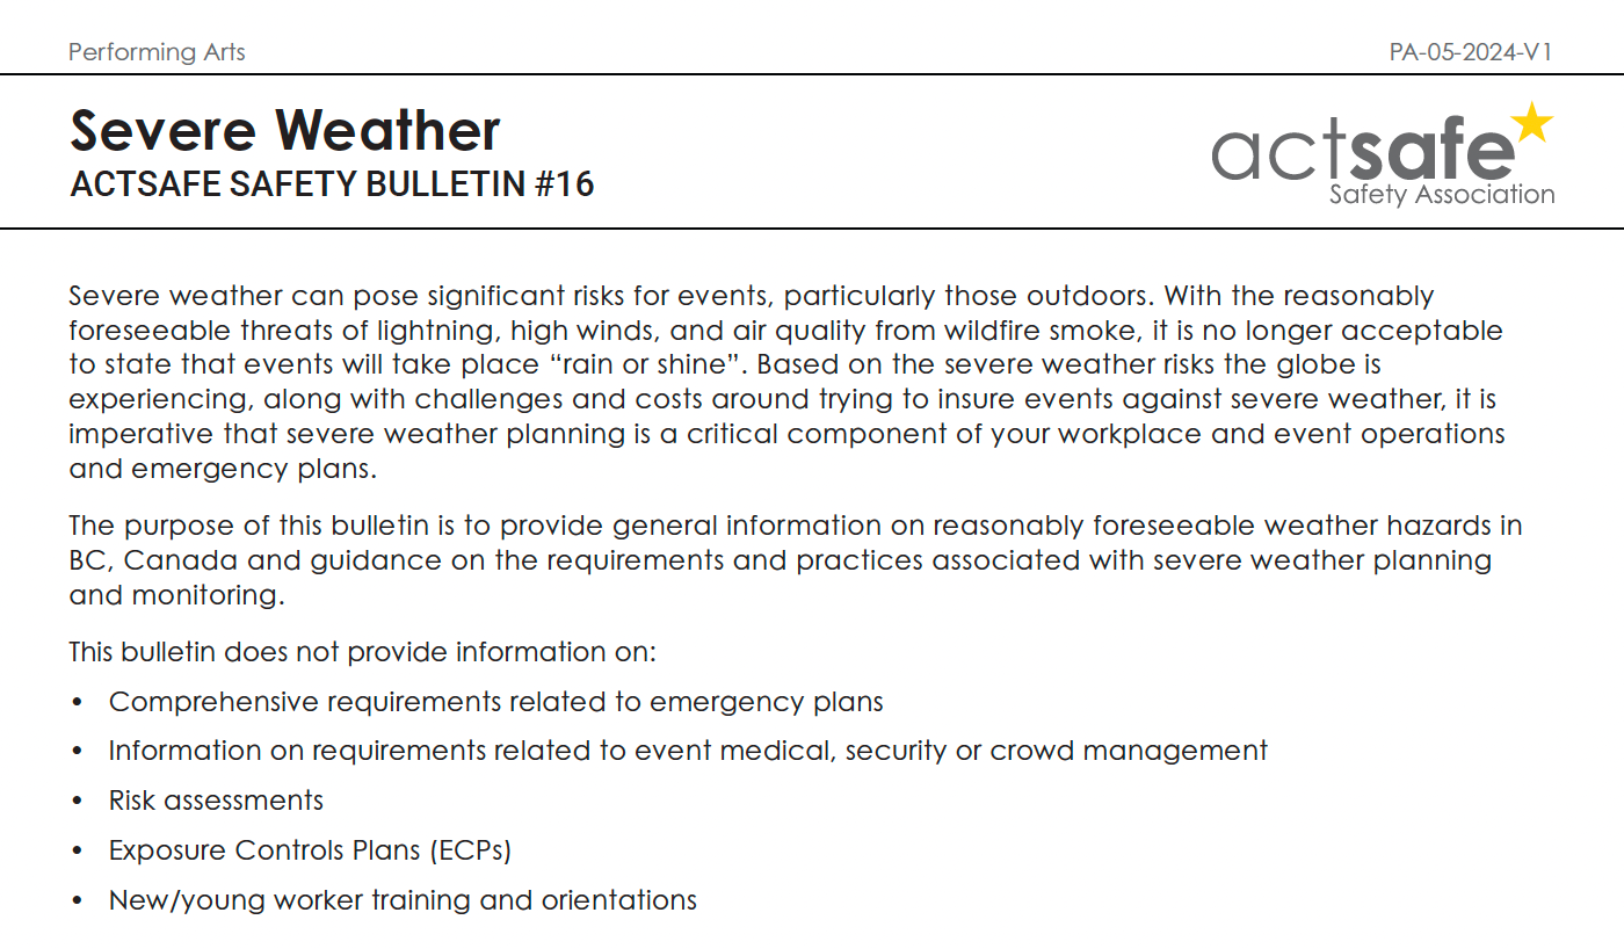 #16 Severe Weather Safety Bulletin